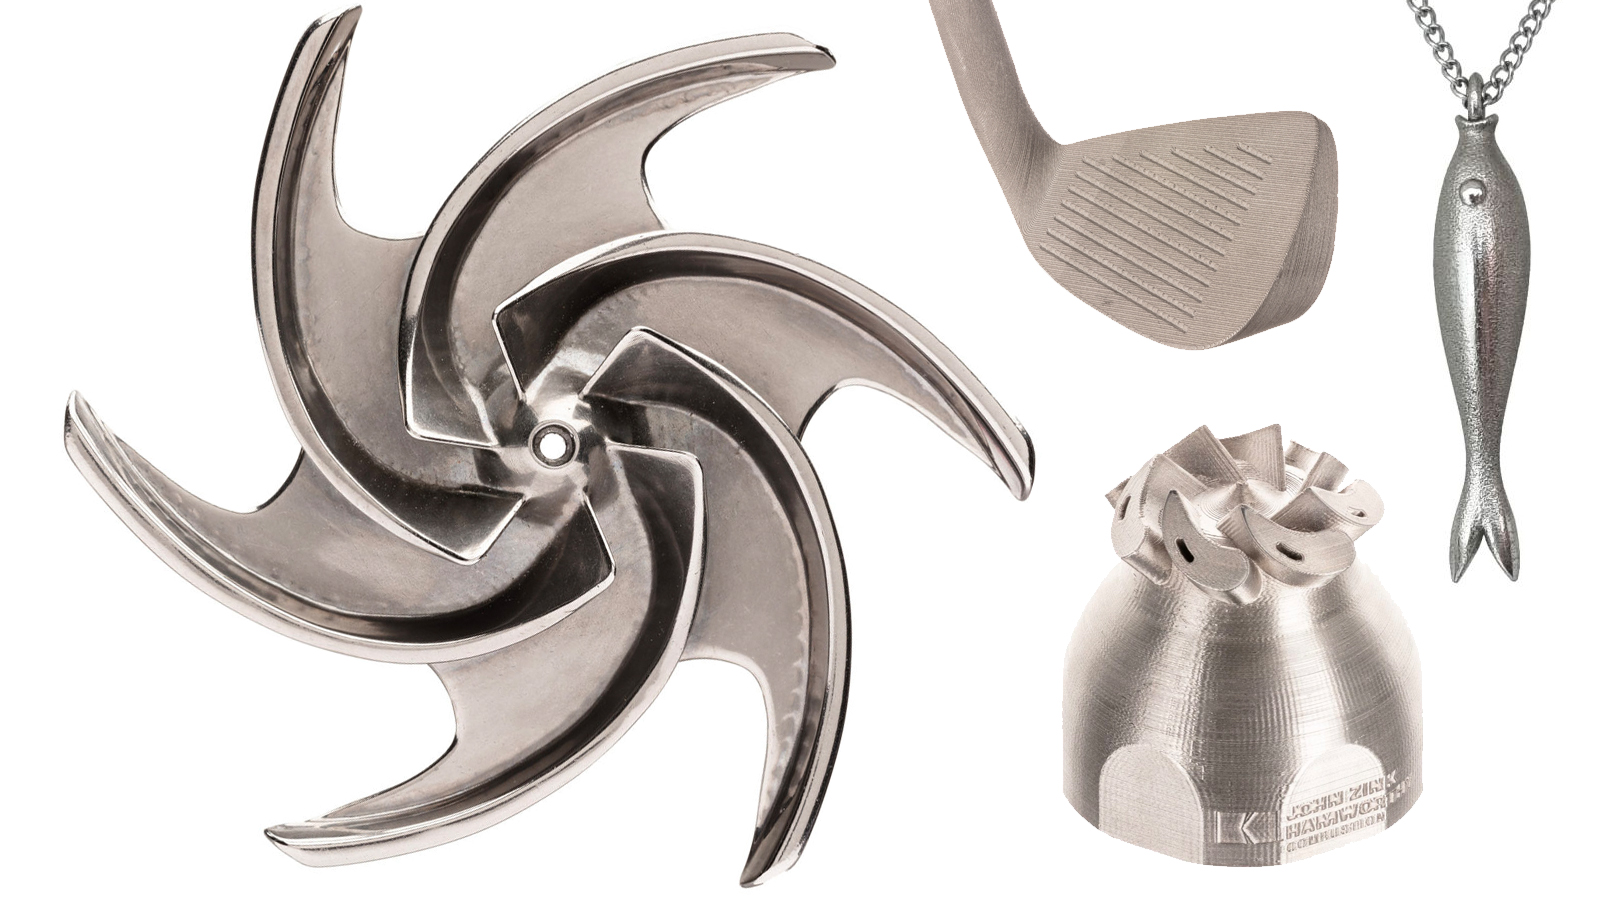 Stainless Steel 3D Printing – The Guide | All3DP Pro